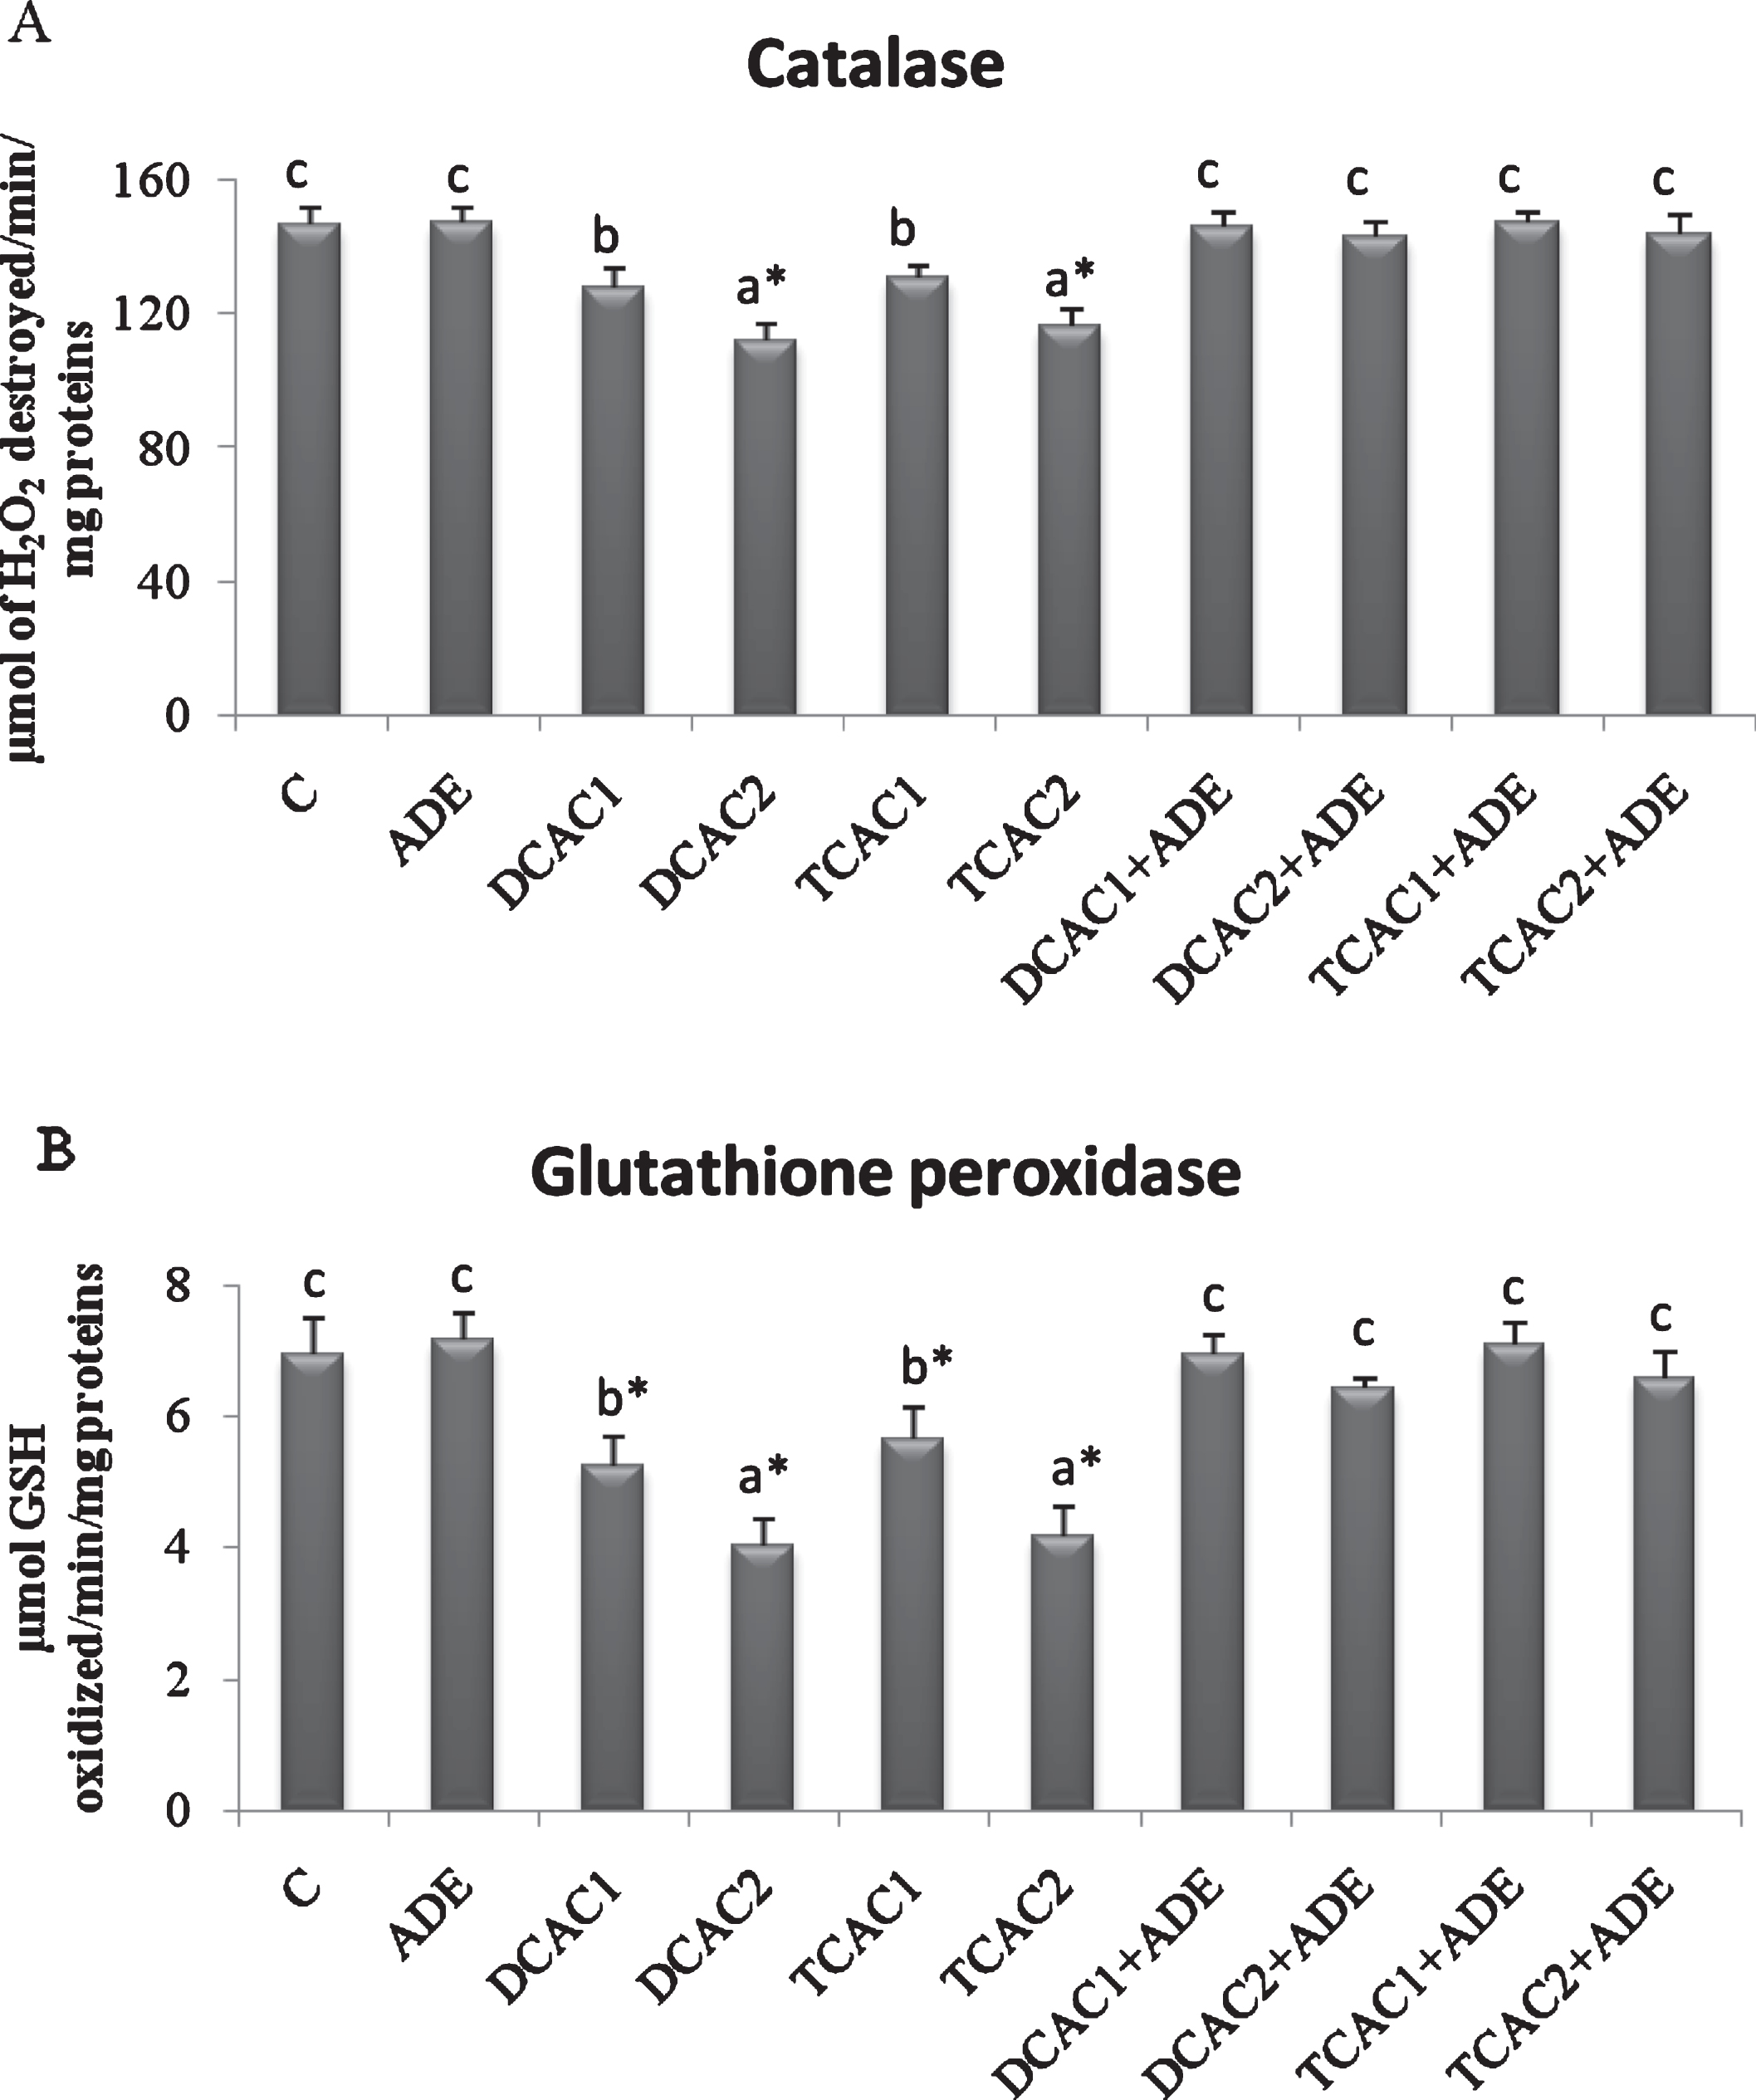 Effect of aqueous date extract on the plasma antioxidant activity of catalase (A) and glutathione peroxidase (B) of rats treated with DCA and TCA at 0.5 or 2 g/L. Data are reported as the mean±SD of eight animals in each group. Bars not sharing a common superscript letter (a–c) differ significantly at p < 0.05. C, control; ADE, aqueous date extract; DCAC1, dichloroacetic acid at 0.5 g/L; DCAC2, dichloroacetic acid at 2 g/L, TAC1, trichloroacetic acid at 0.5 g/L, TAC2, trichloroacetic acid at 2 g/L. *Significant difference (p < 0.05) compared to control group.